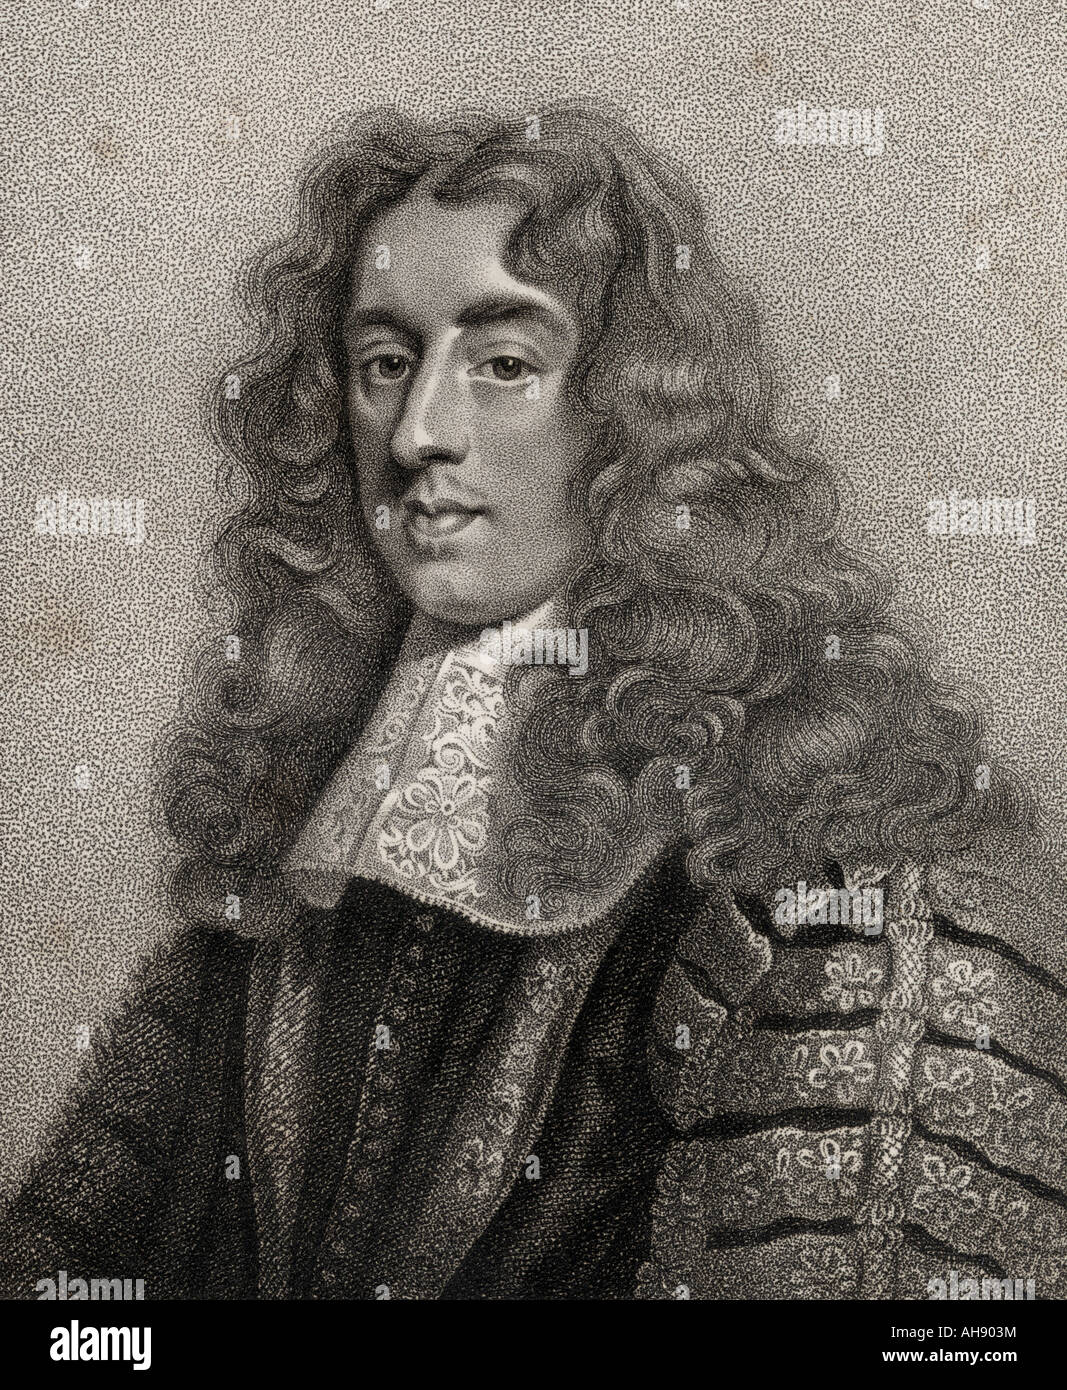 Heneage Finch, 1st Earl of Nottingham, Baron Finch of Daventry, 1621 - 1682. Lord chancellor of England. Stock Photo